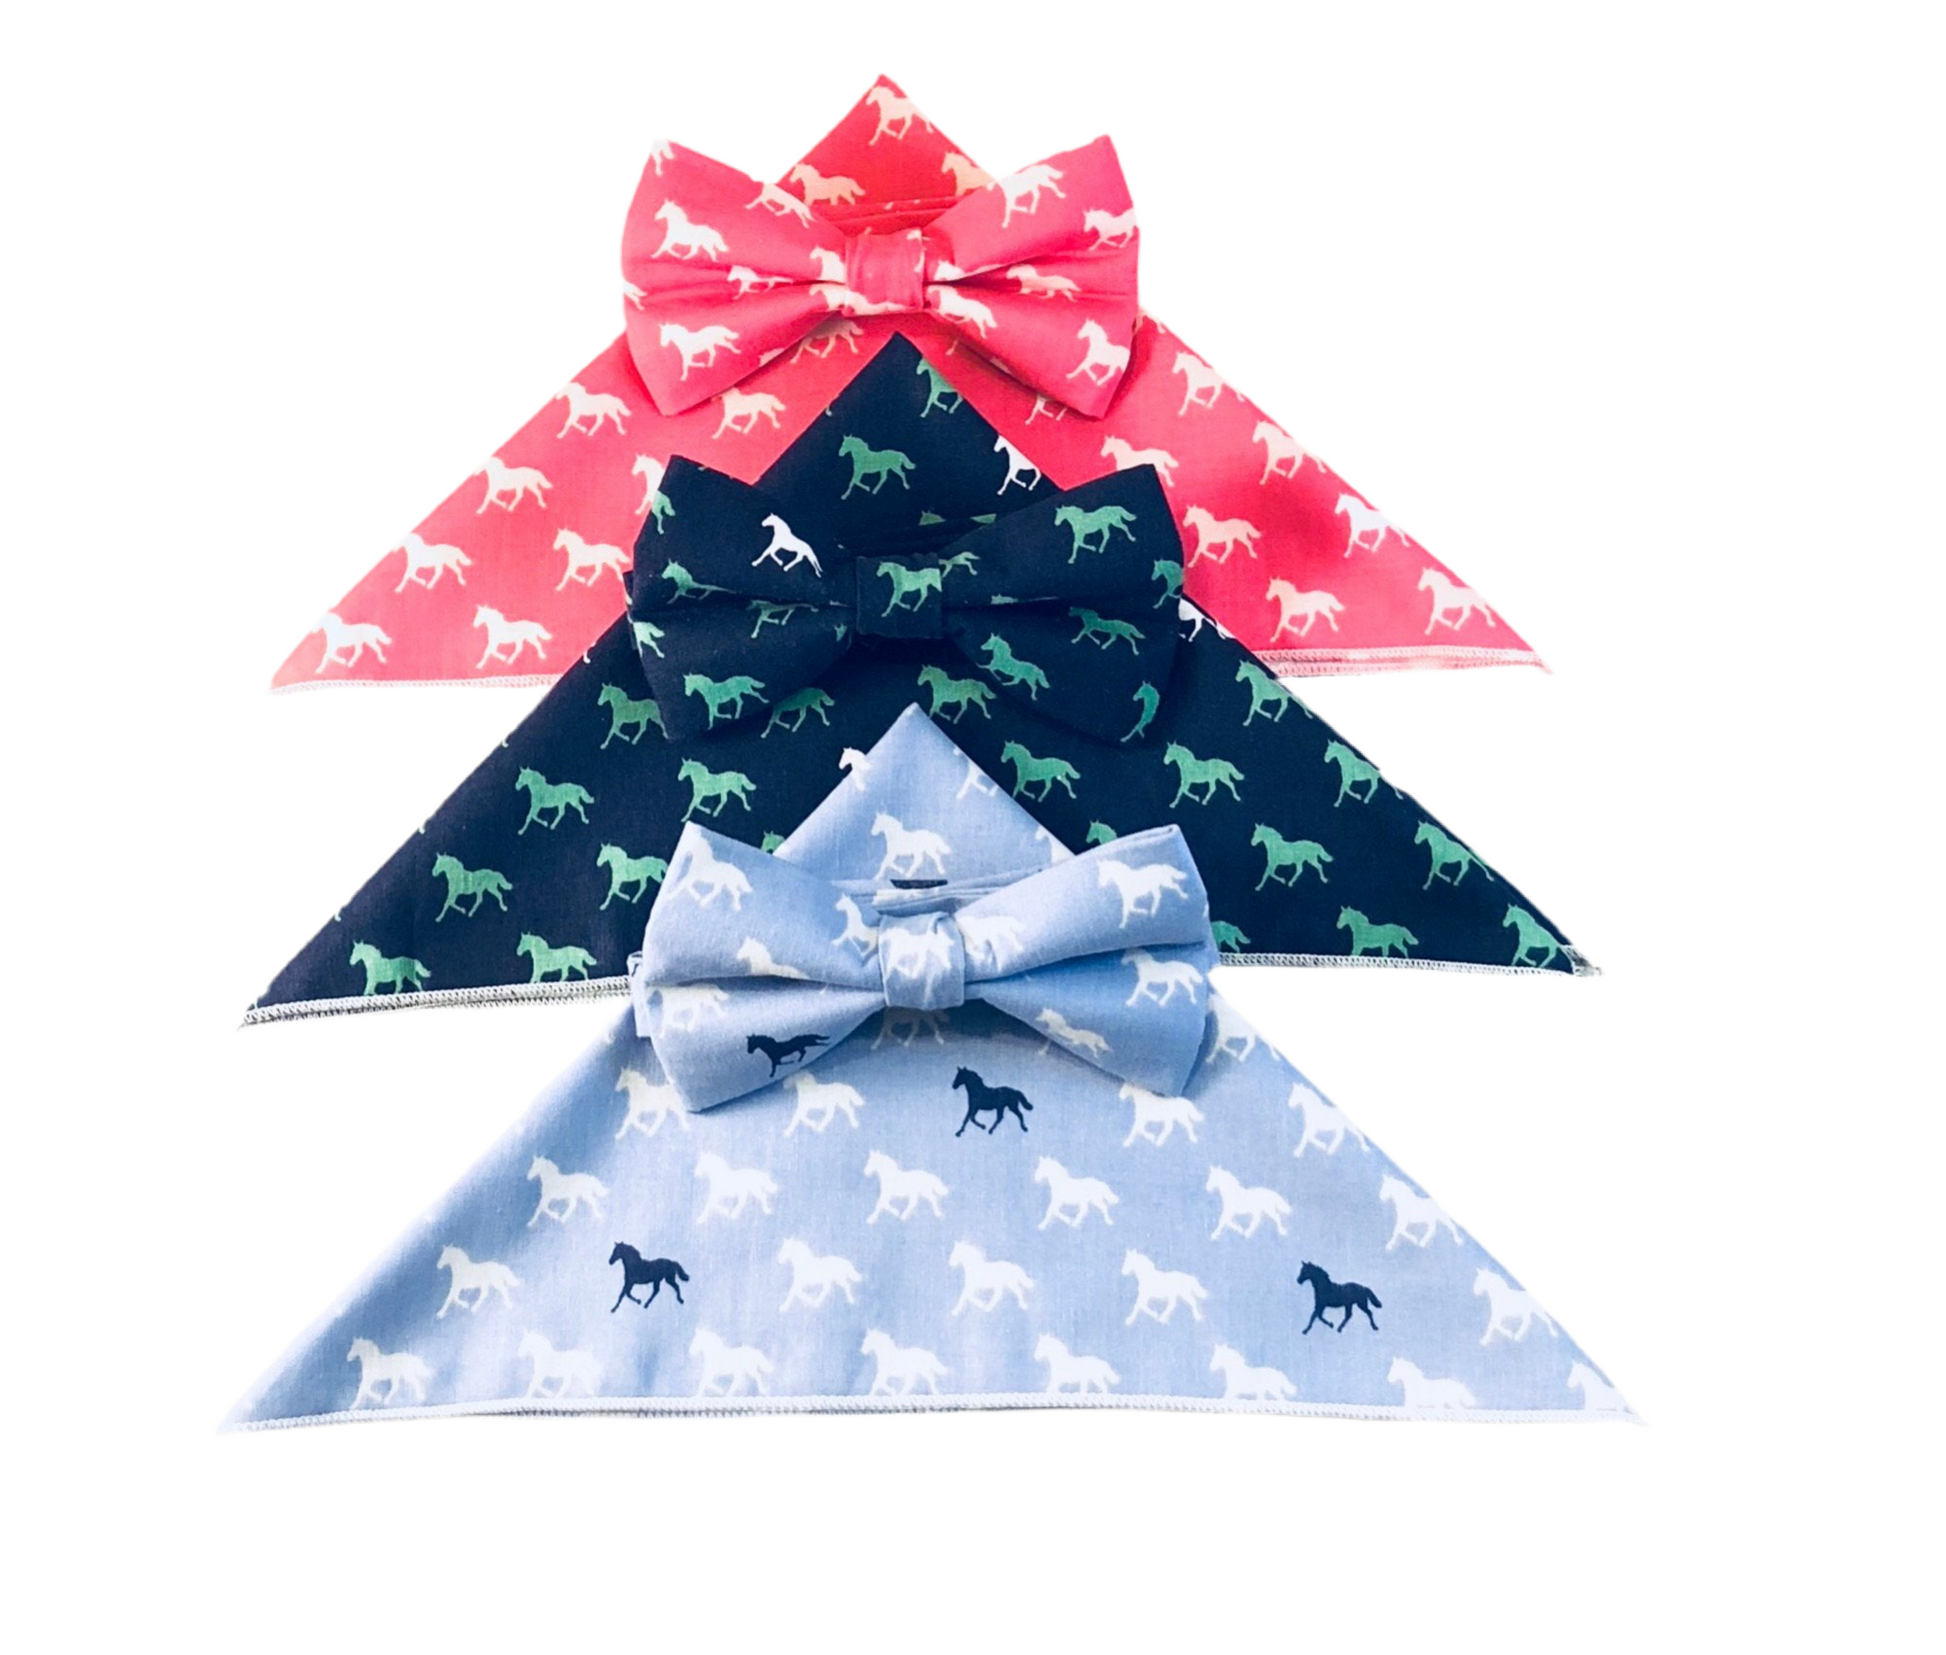 Men’s and boys derby horses print pre-tied bow ties with matching pocket squares in the colors blue, pink and navy with different colored horses on the print.